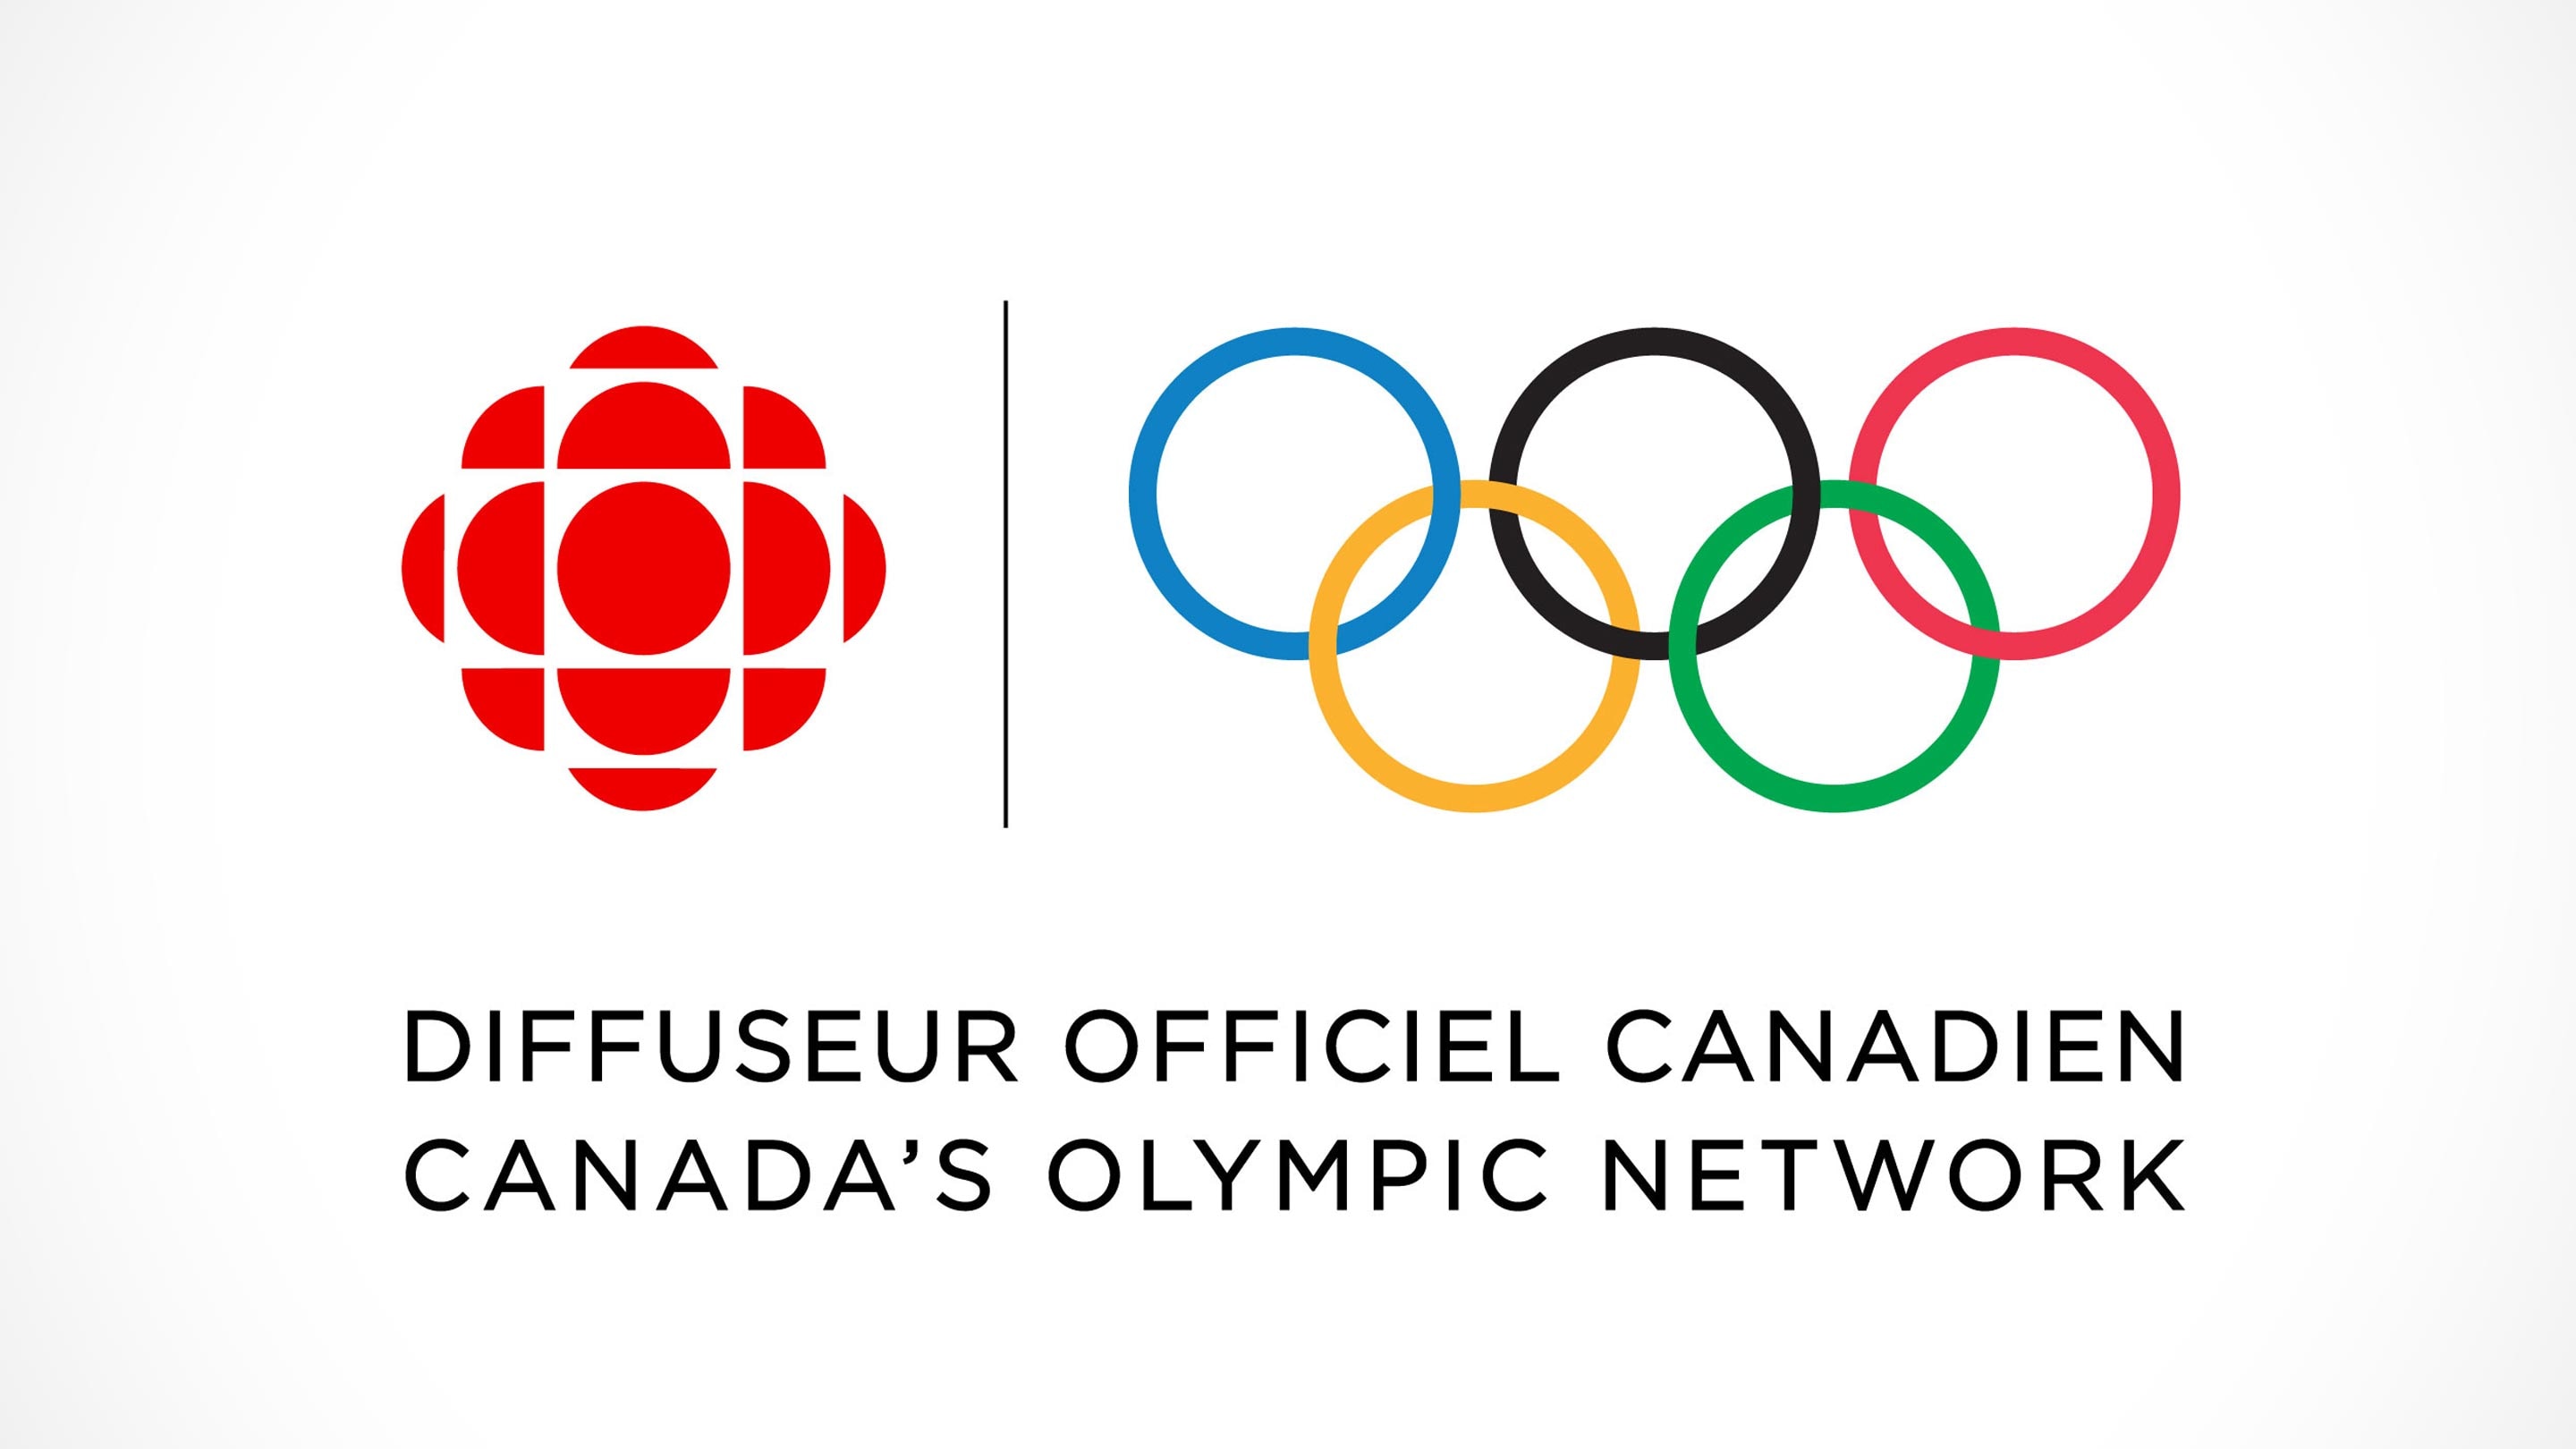 IOC awards CBC/RadioCanada broadcast rights for Olympic Games from